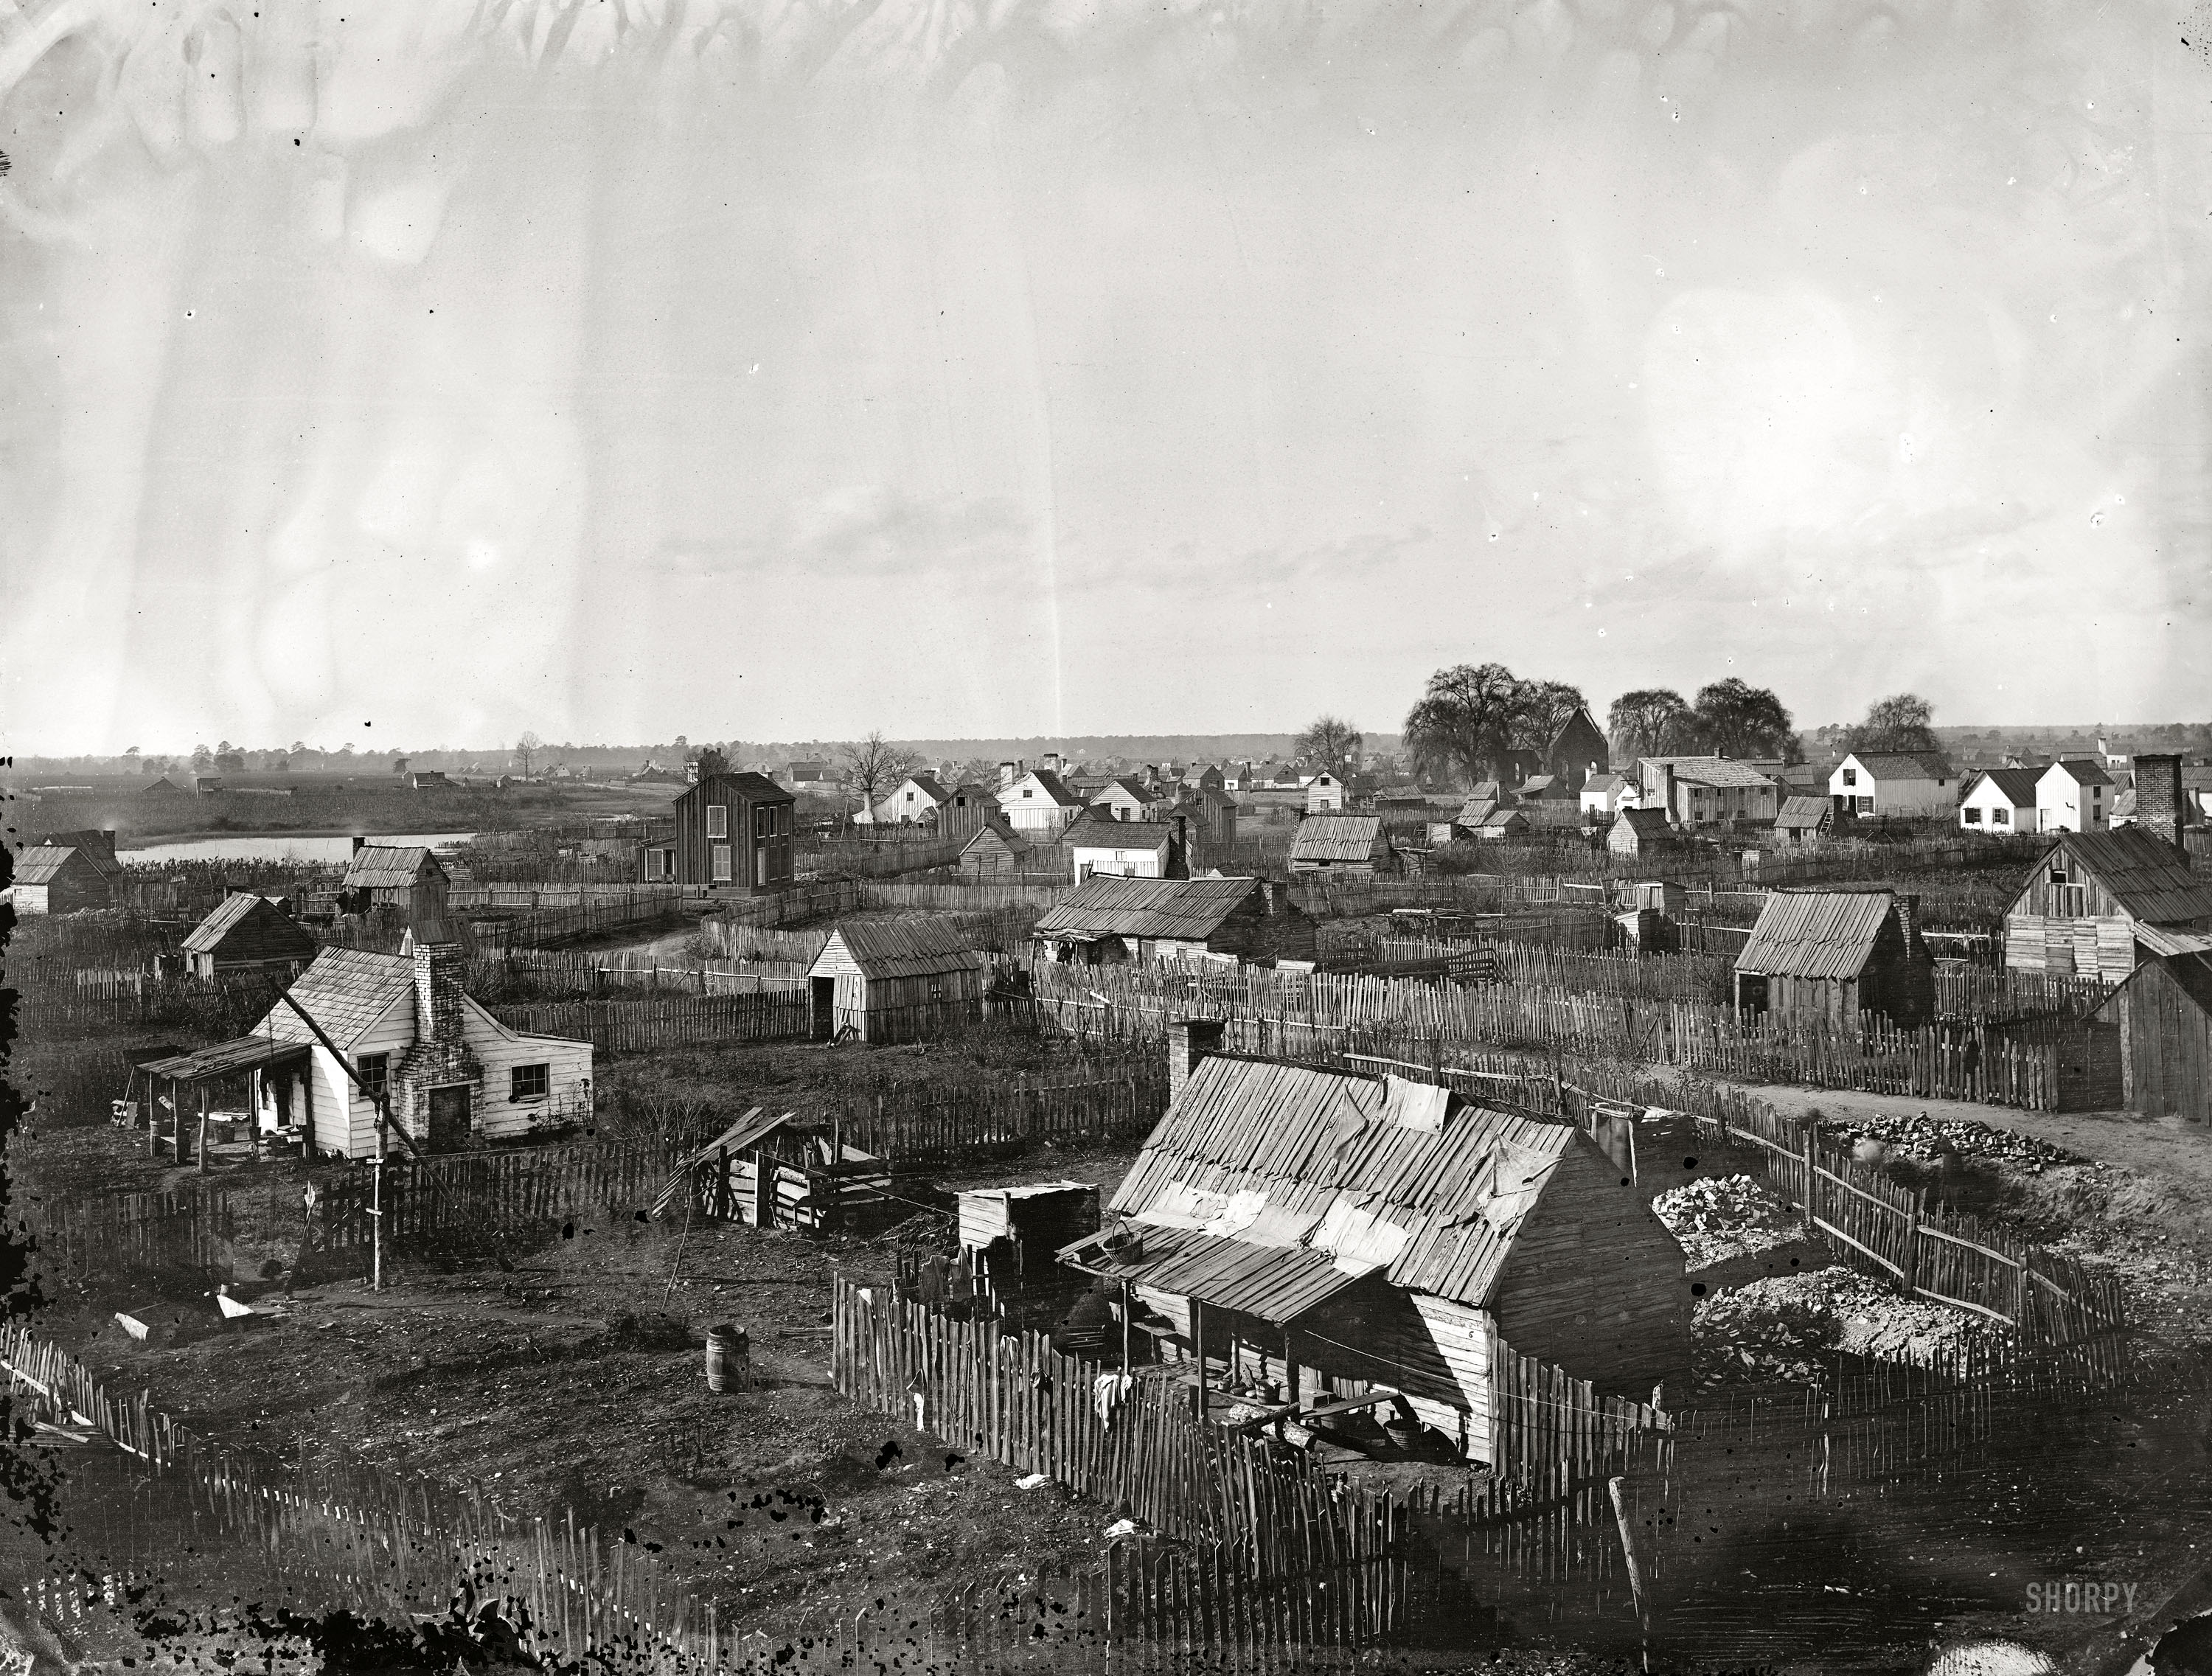 December 1864. "Hampton, Virginia. View of the town. From photographs of the Federal Navy and seaborne expeditions against the Atlantic Coast of the Confederacy." Wet-plate glass negative, photographer unknown. View full size.